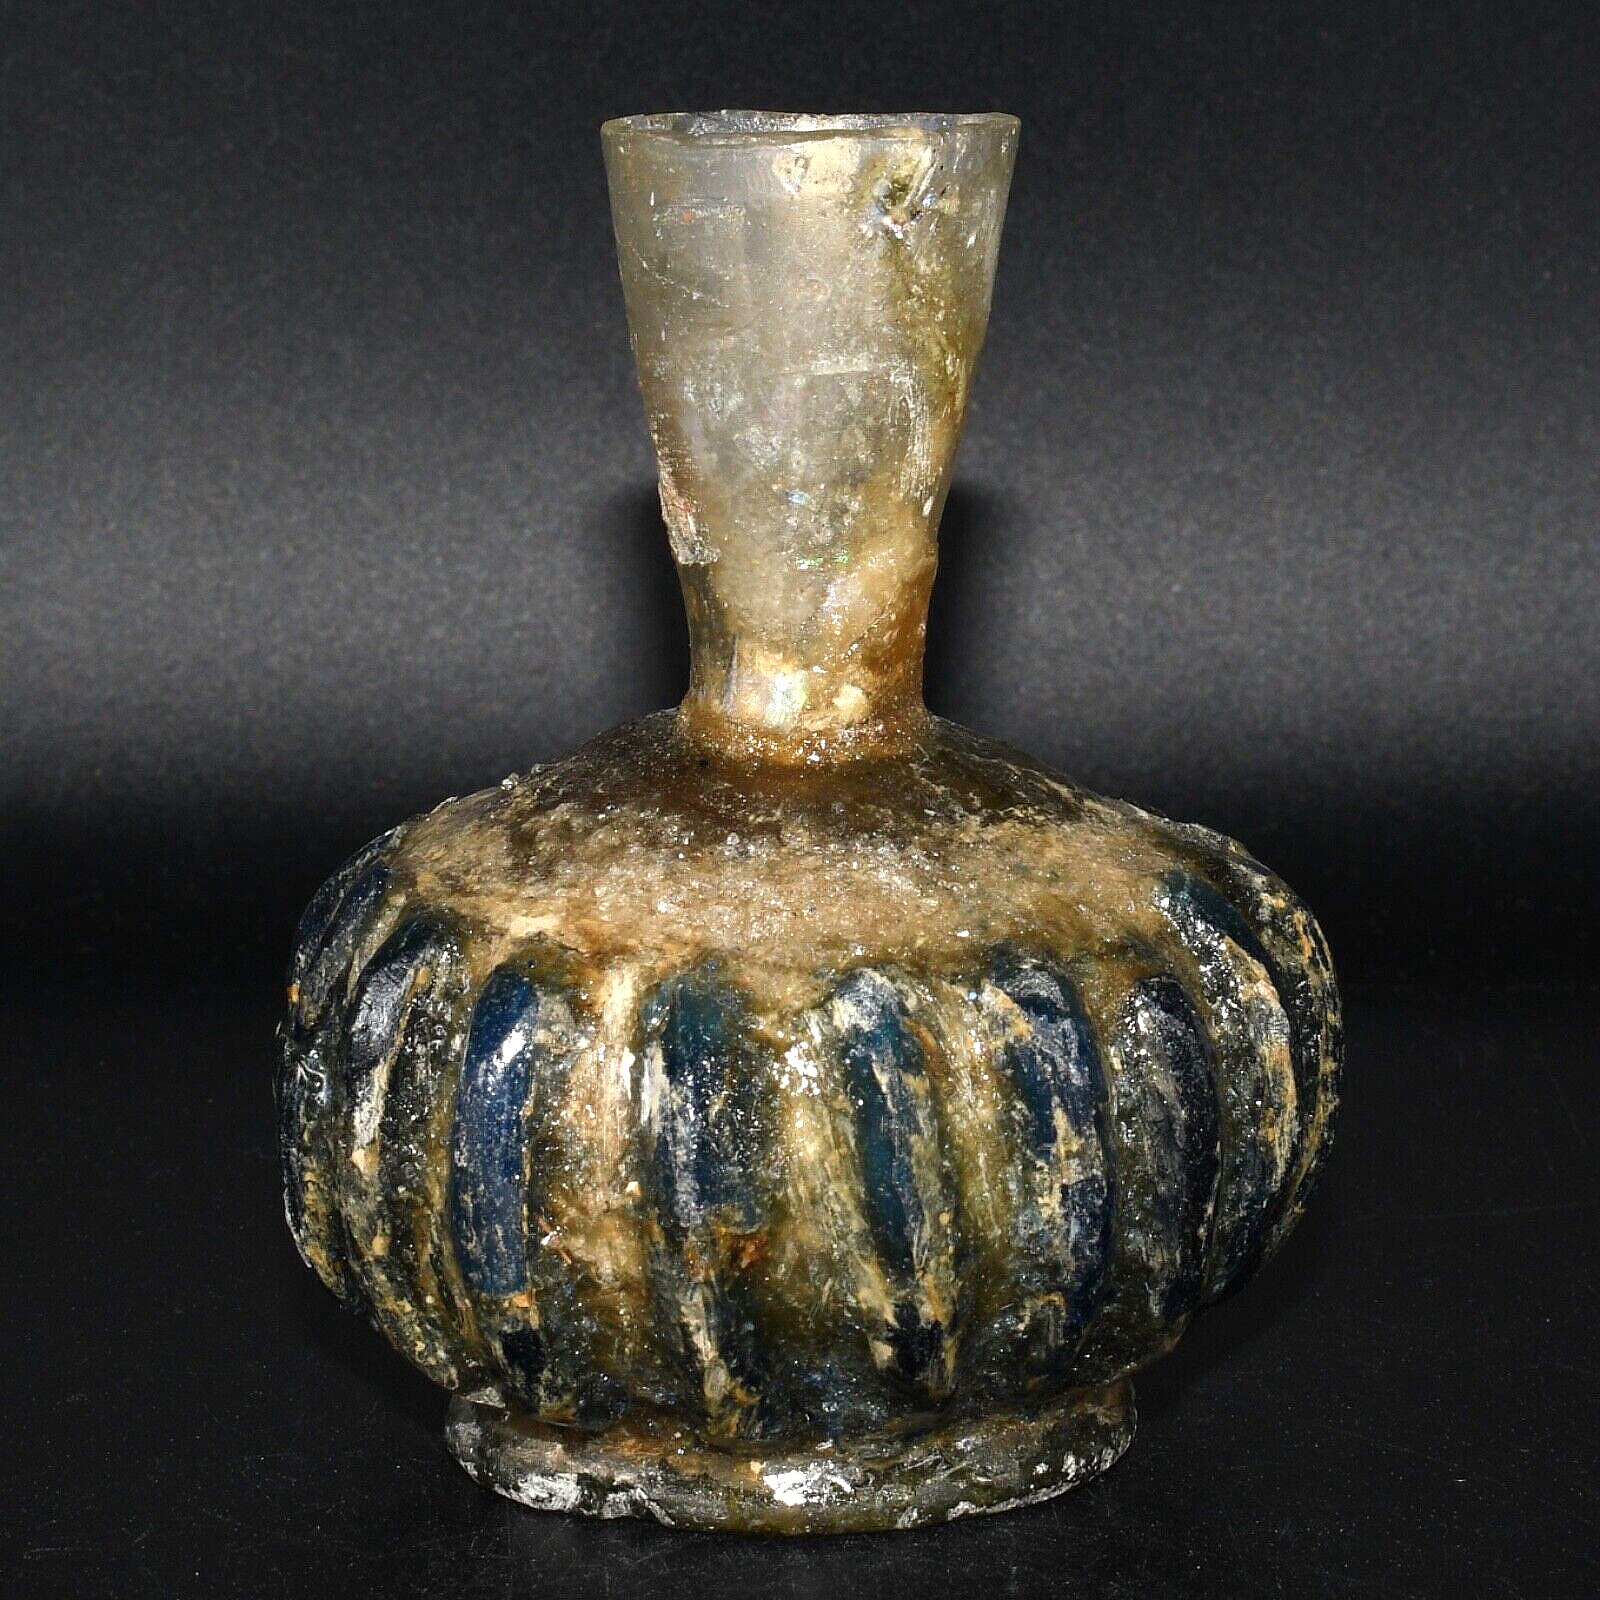 Genuine Large Ancient Roman Glass Bottle Vase with Trailed Glass Decoration